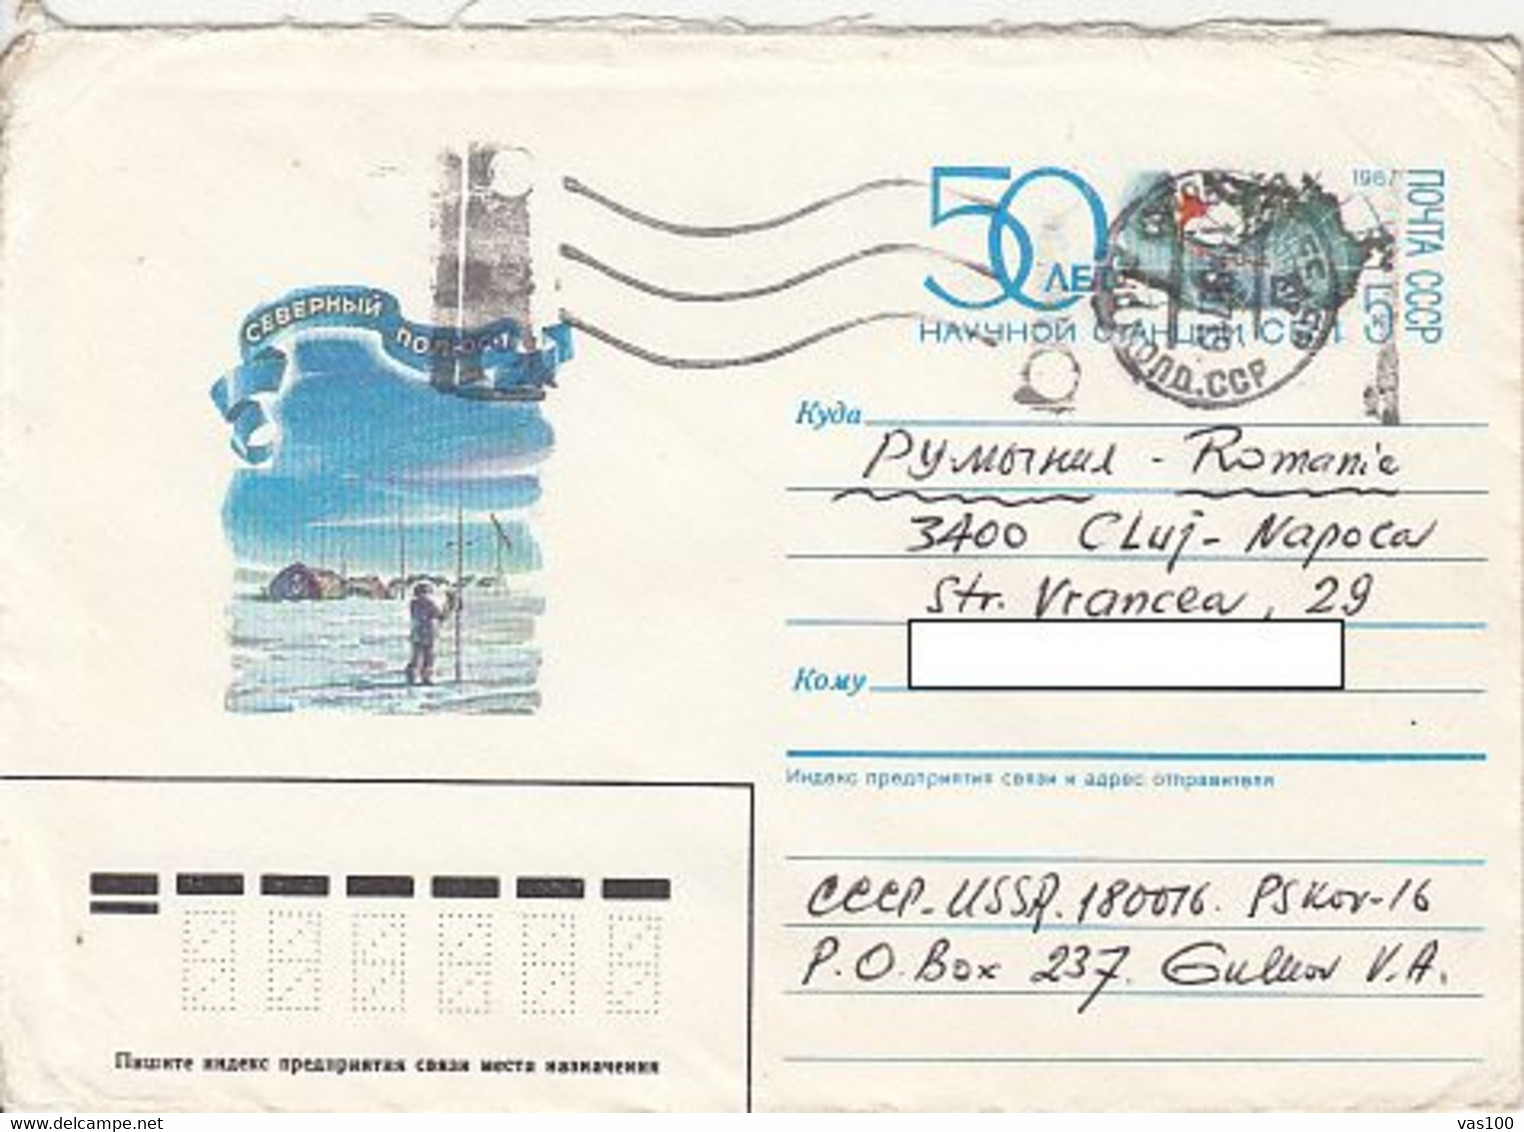 NORTH POLE, POLIUS 1 ARCTIC STATION, COVER STATIONERY, ENTIER POSTAL, 1987, RUSSIA - Scientific Stations & Arctic Drifting Stations